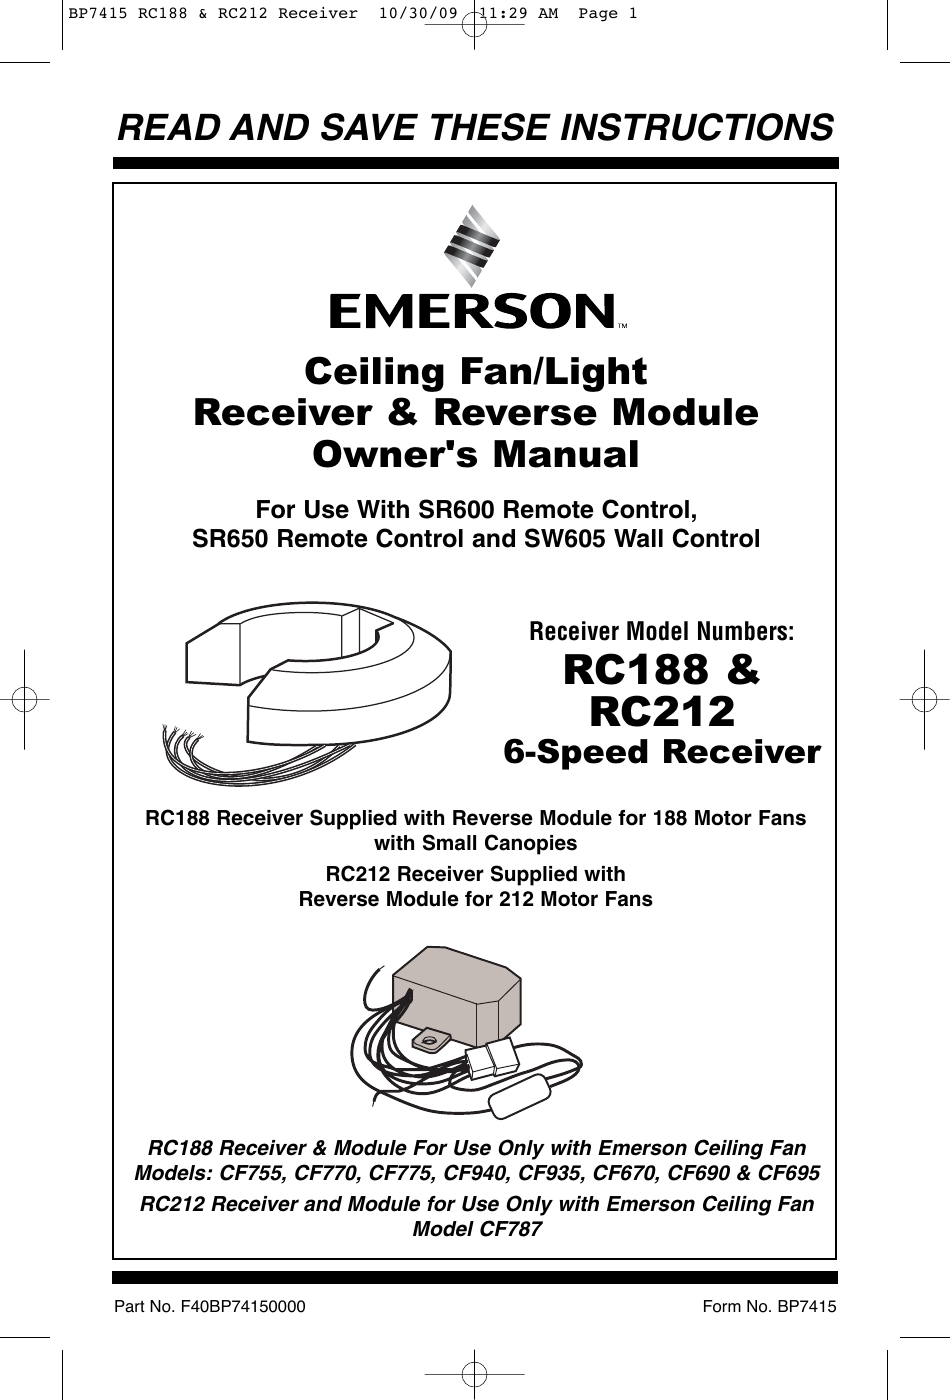 Page 1 of 12 - Emerson Emerson-Rc188-Owners-Manual- BP7415 RC188 & RC212 Receiver  Emerson-rc188-owners-manual